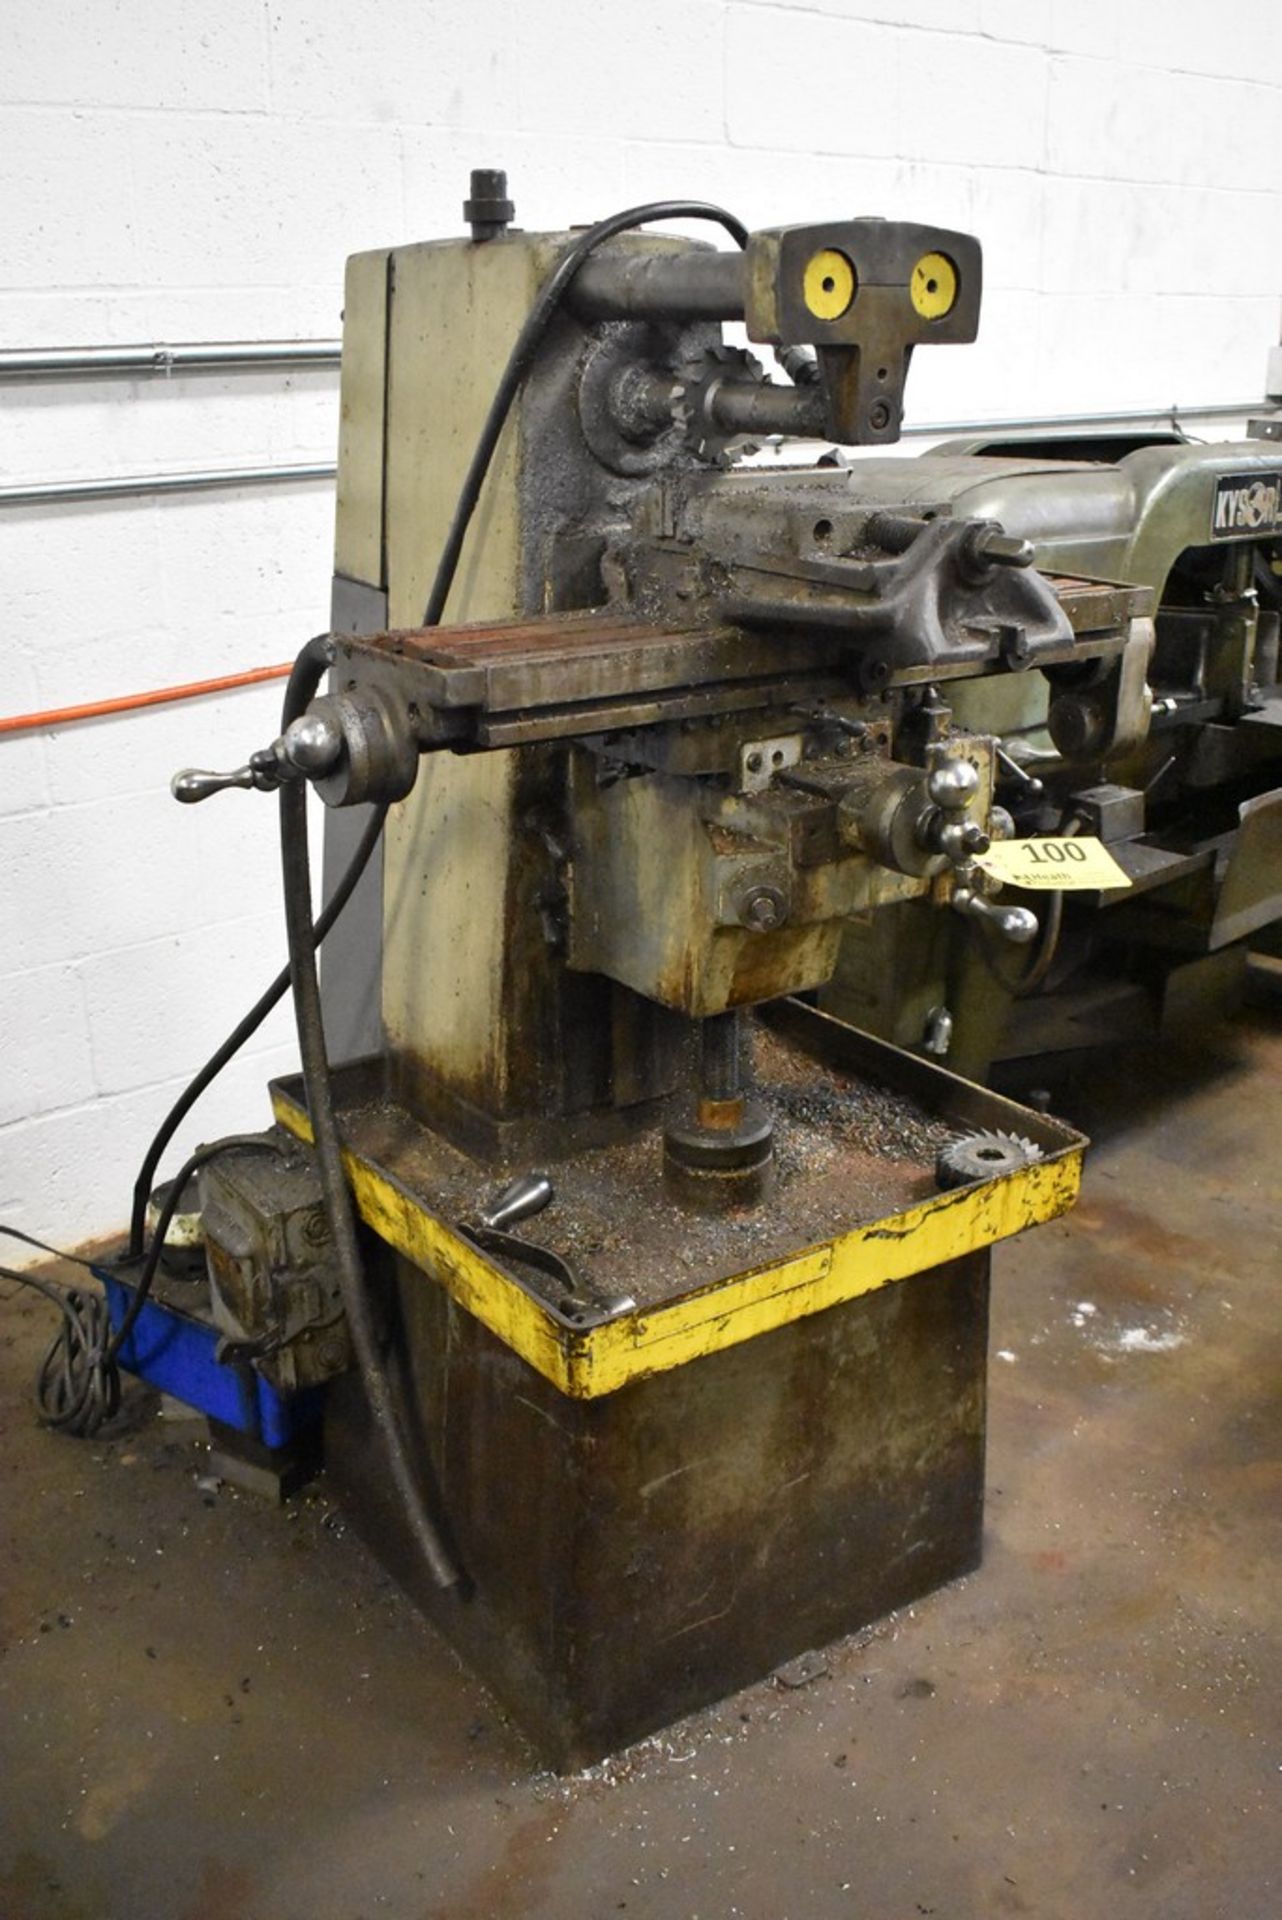 CLAUSING MODEL 8541 HORIZONTAL MILL, S/N 801152, WITH ARBOR SUPPORT - Image 2 of 5